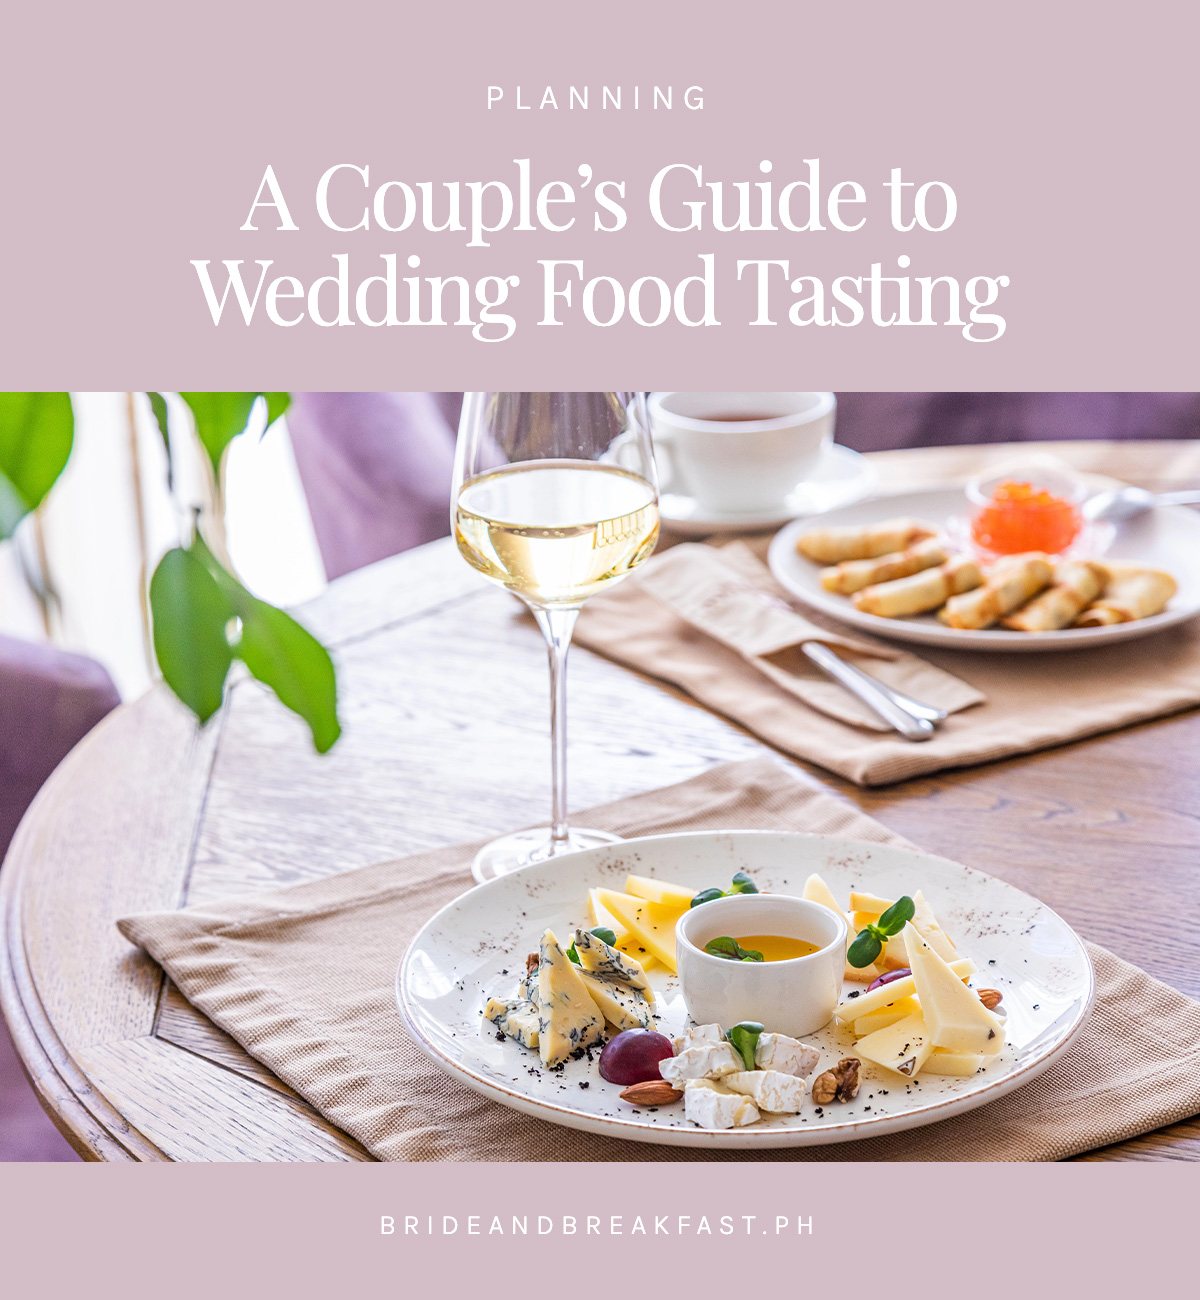 A Couple's Guide to Wedding Food Tasting